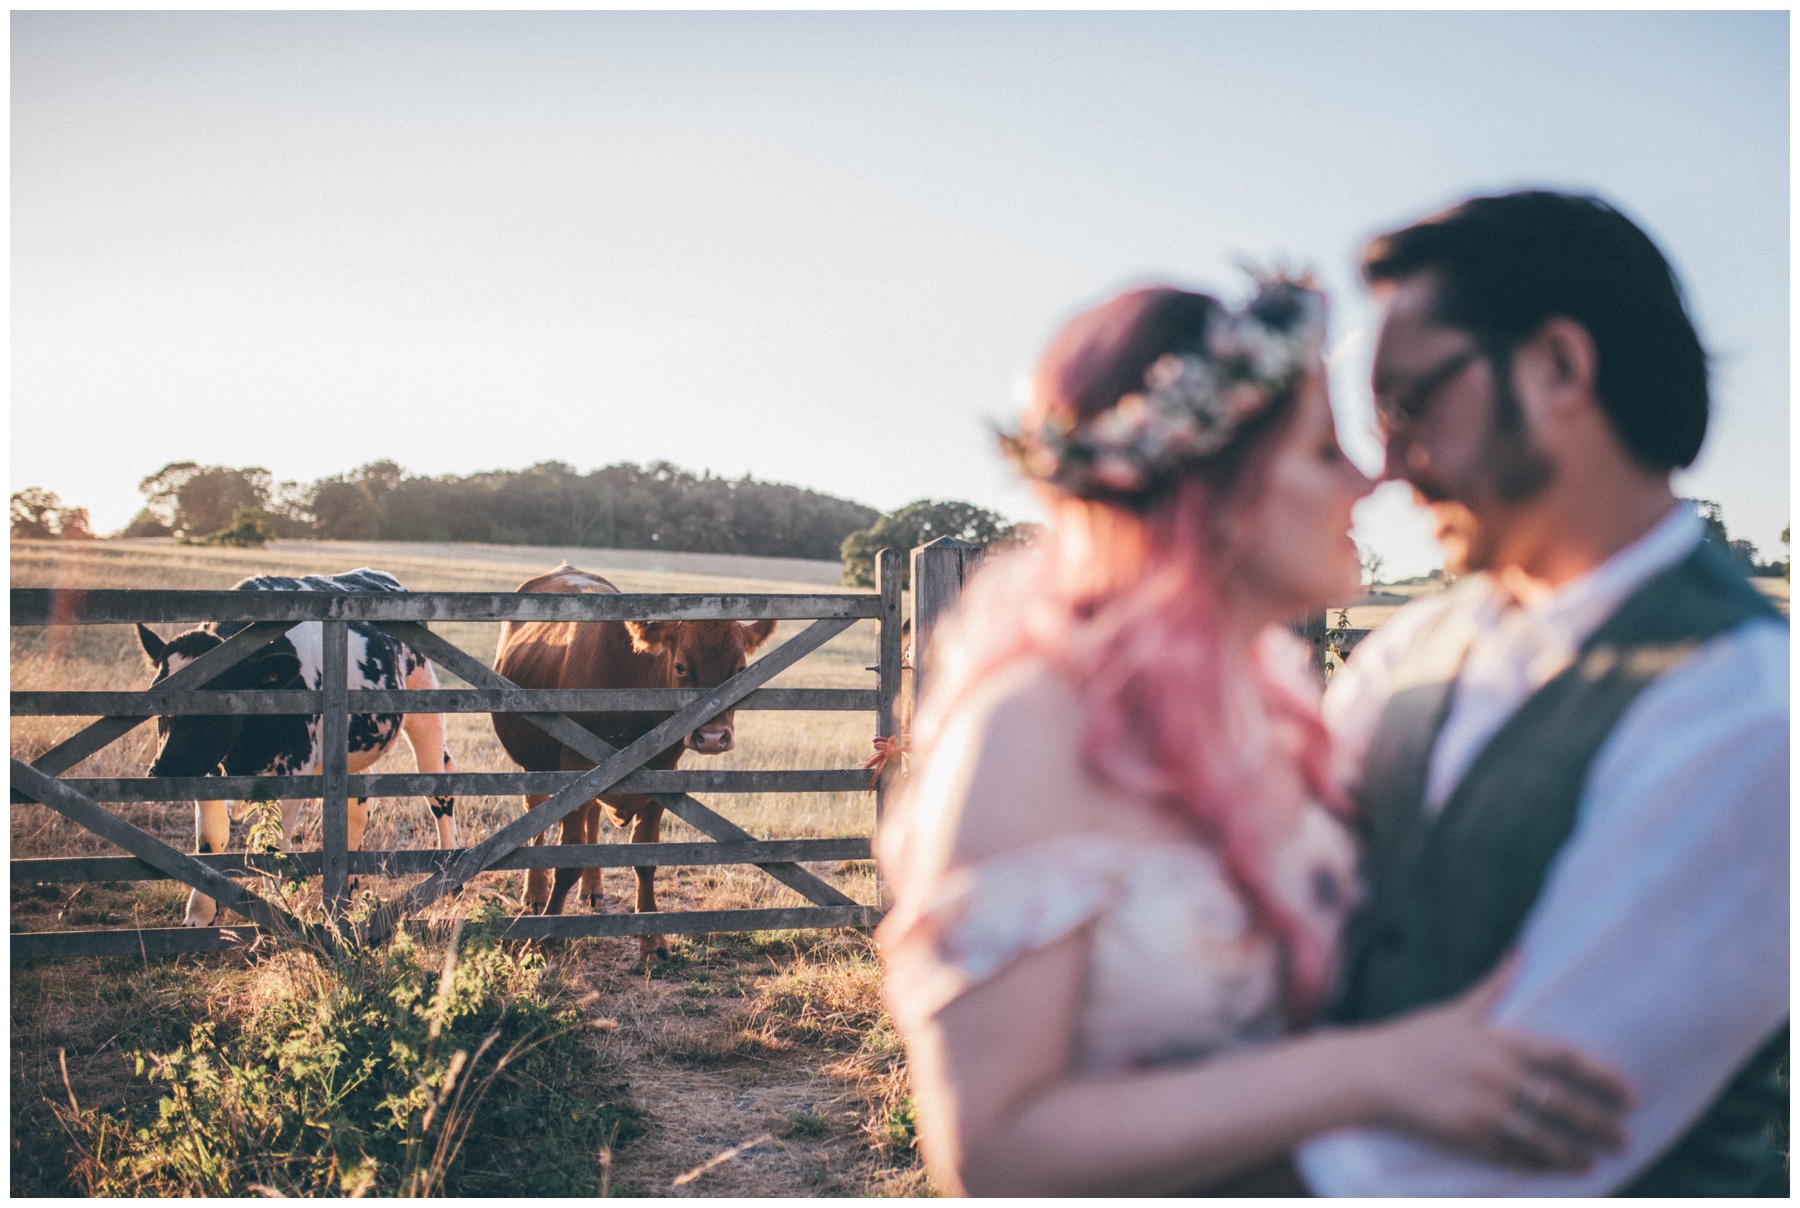 Cows look on hilariously at the bride and groom having a cuddle in Staffordshire wedding.